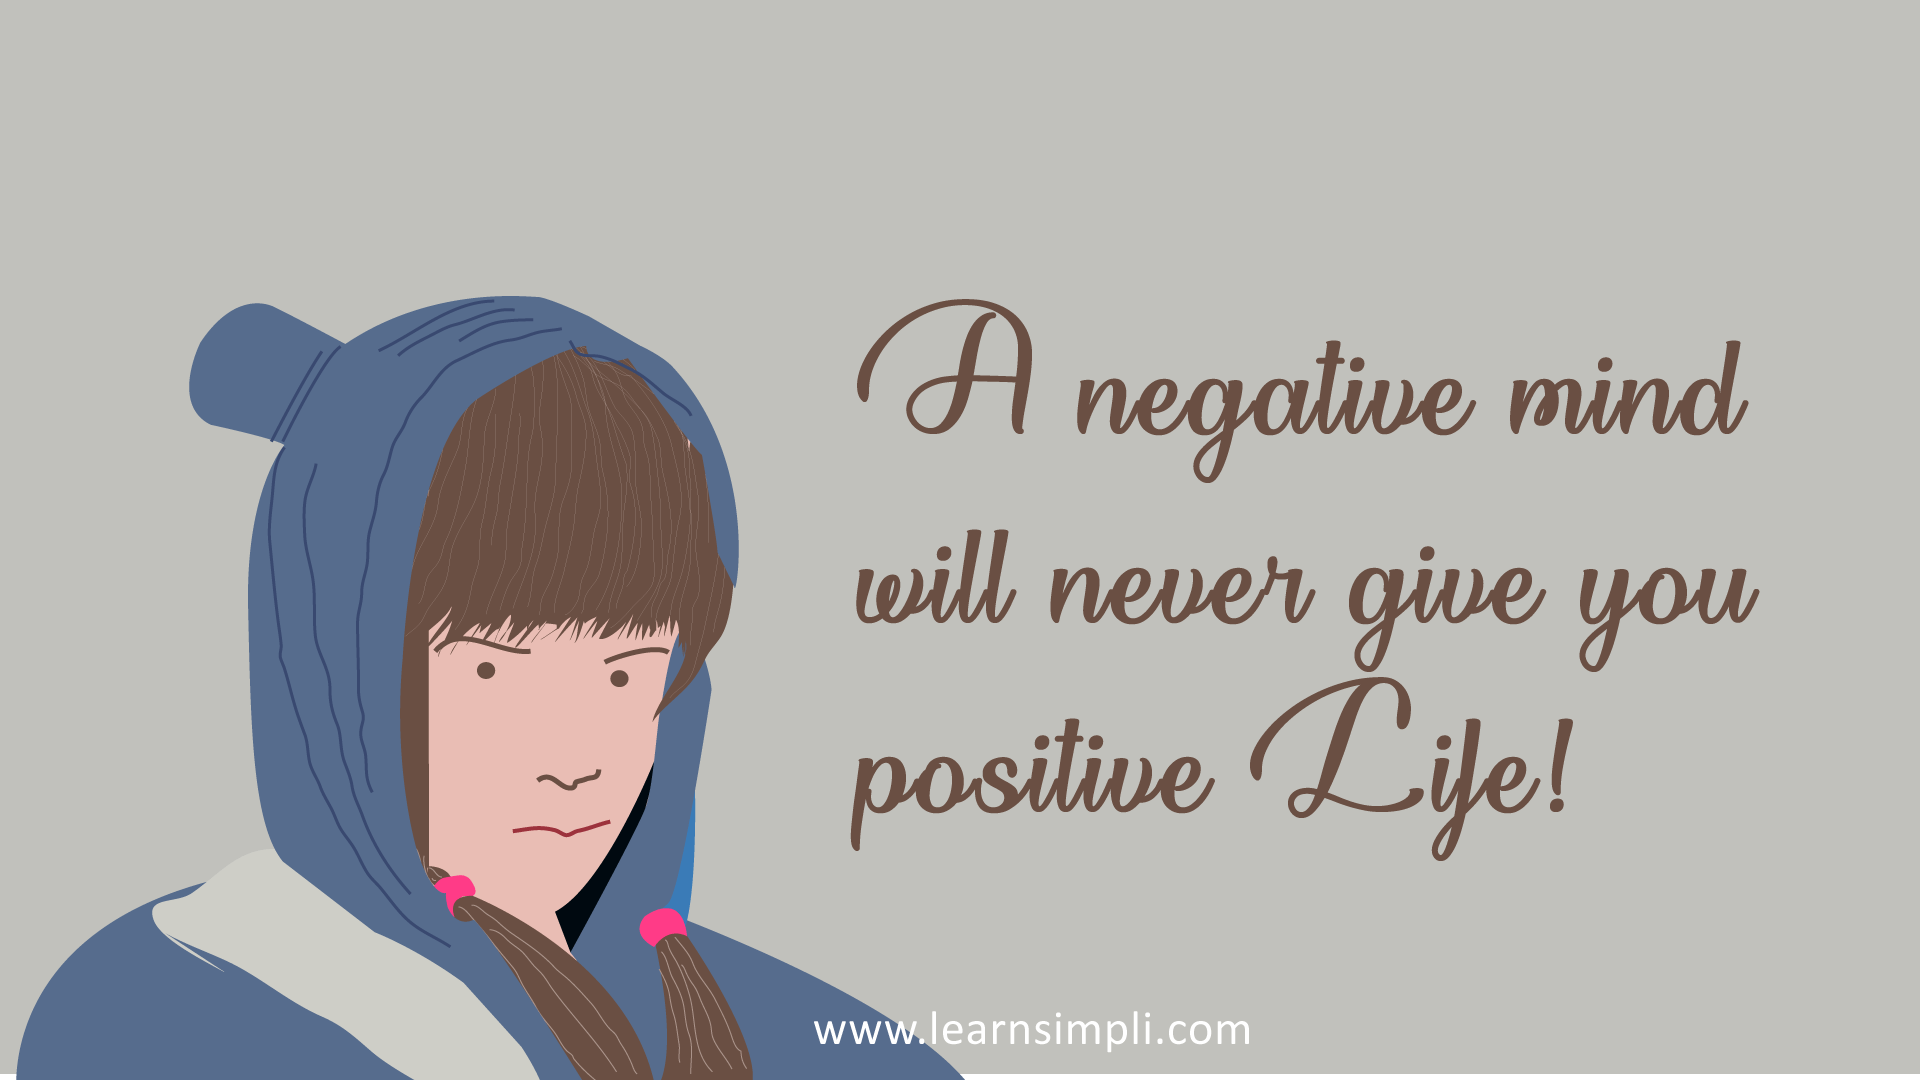 A negative mind will never give you positive life